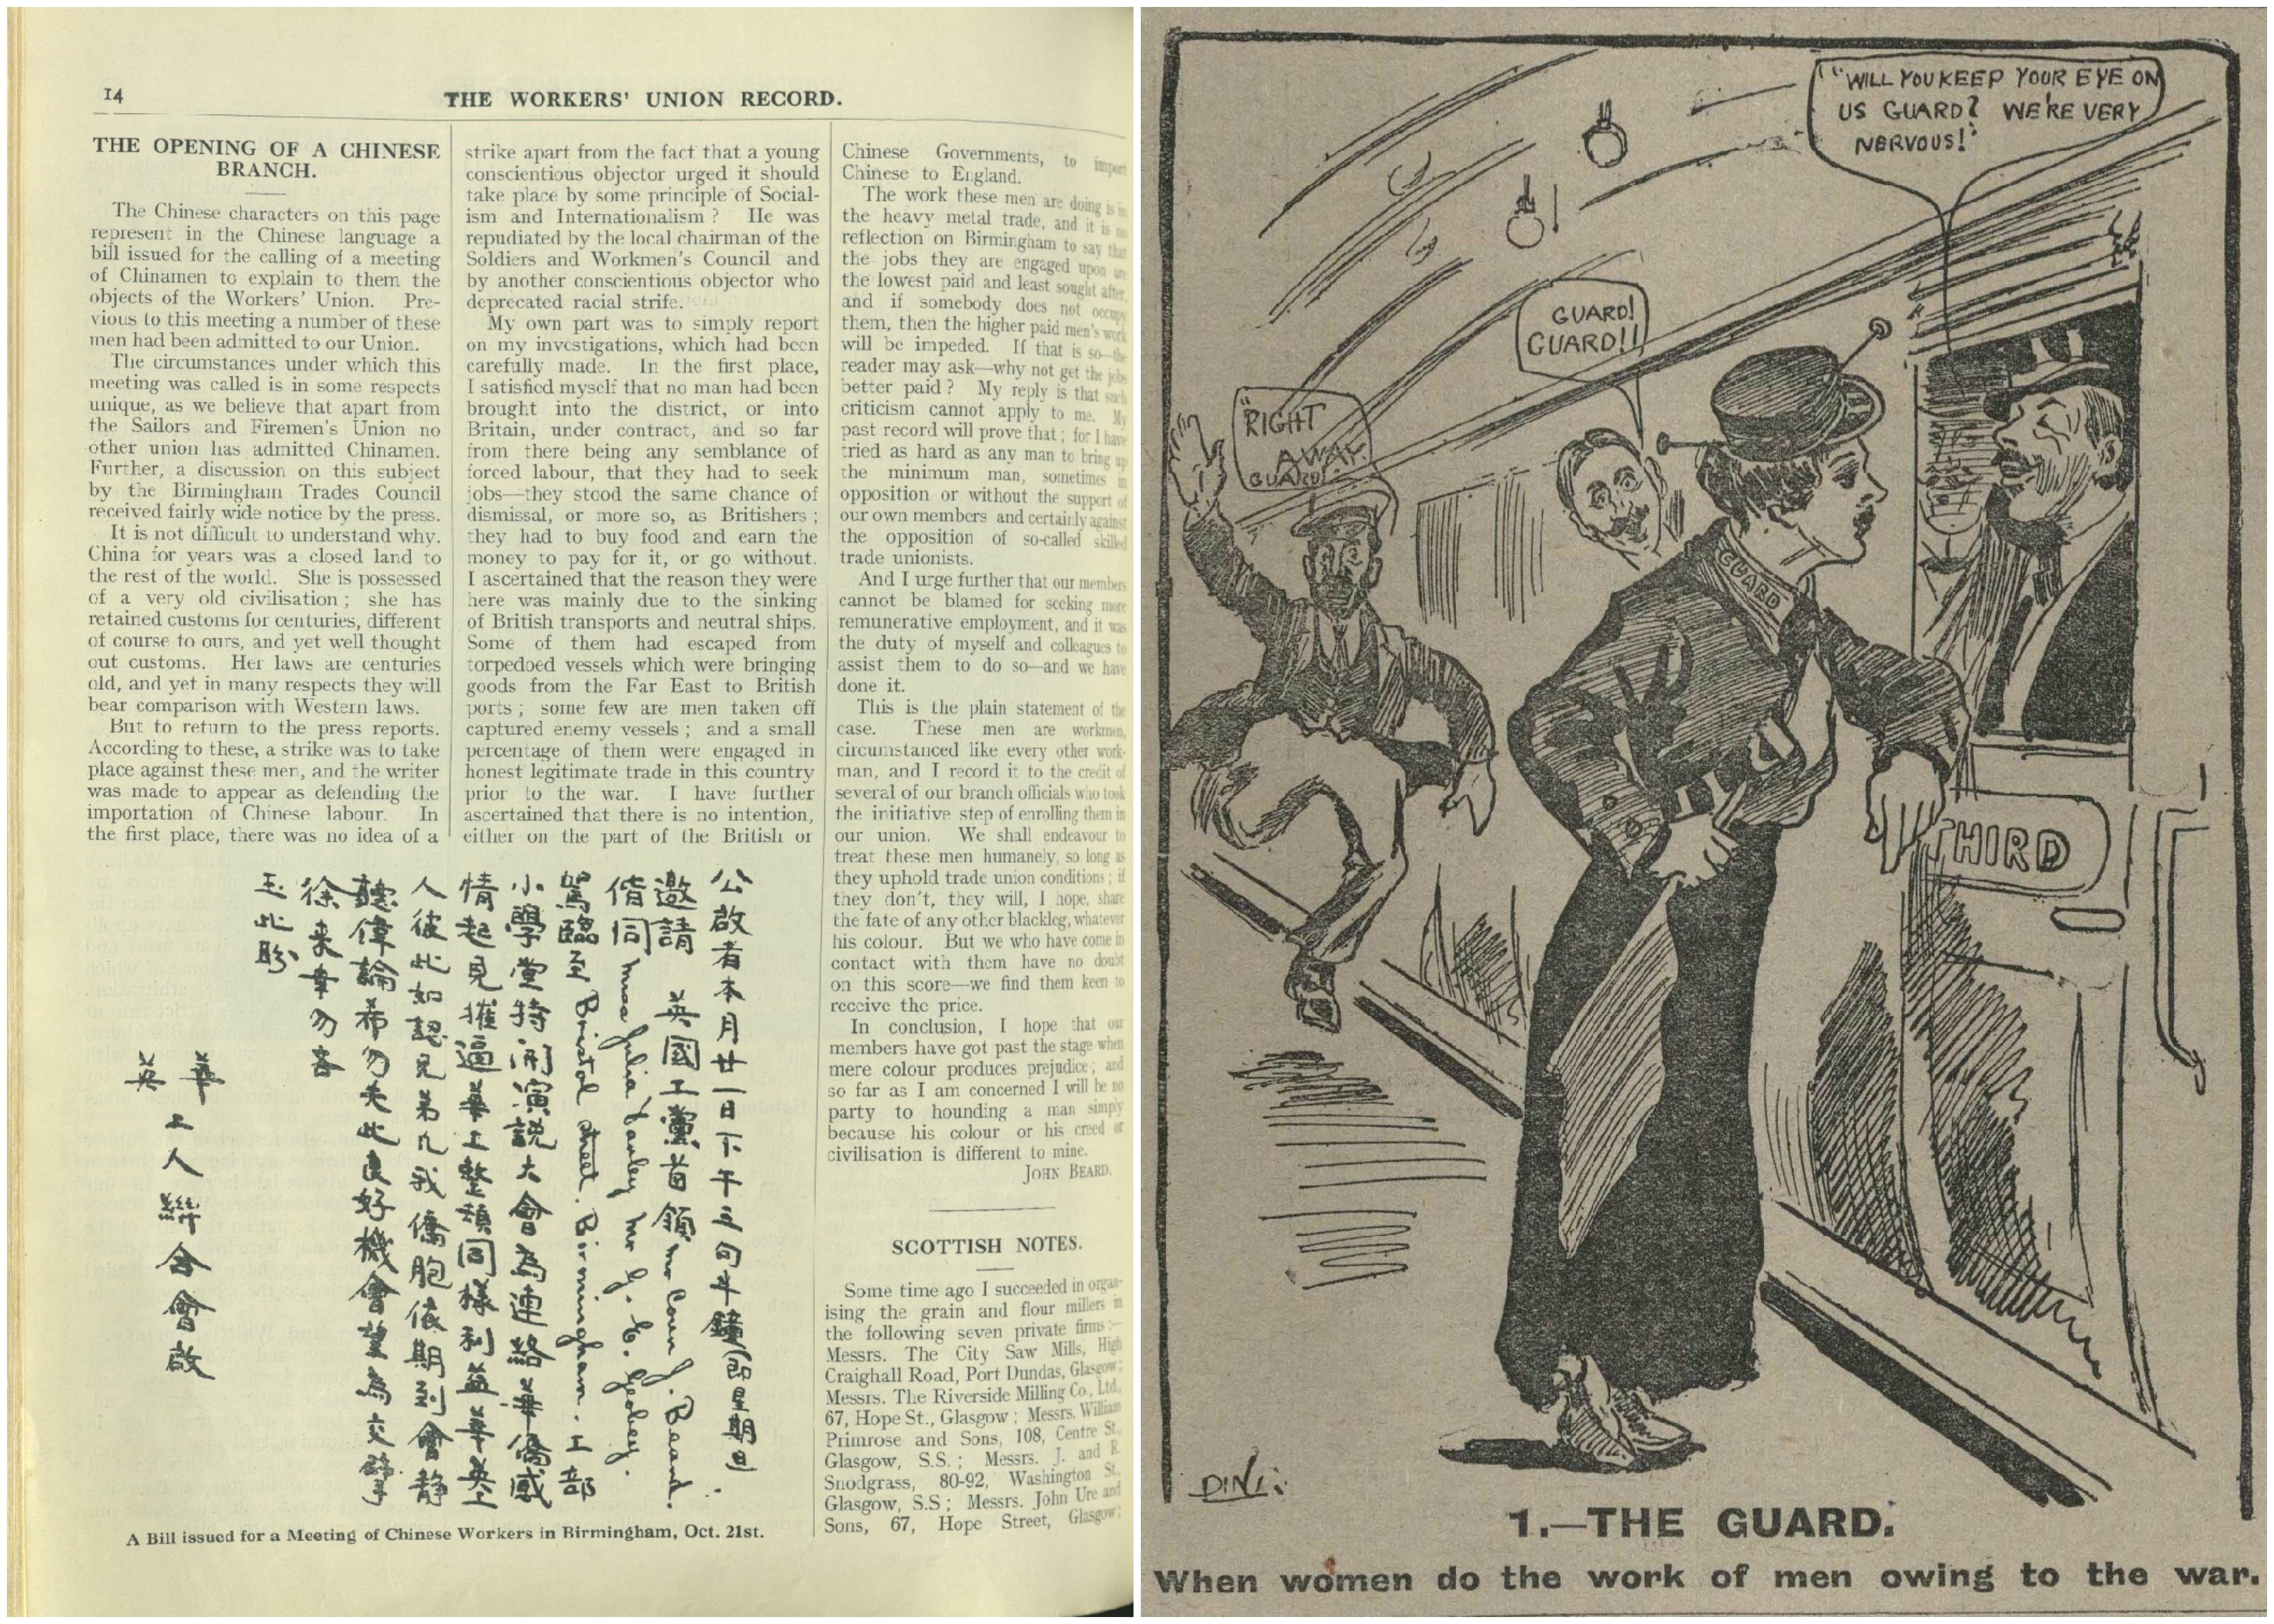 Two images. The first is entirely text and reports on the setting up of a branch of the Workers Union for Chinese workers in the UK. The second shows a woman train guard standing at the door to a third class carriage. A man on the train asks, ‘Will you keep an eye on us, guard? We’re very nervous.’